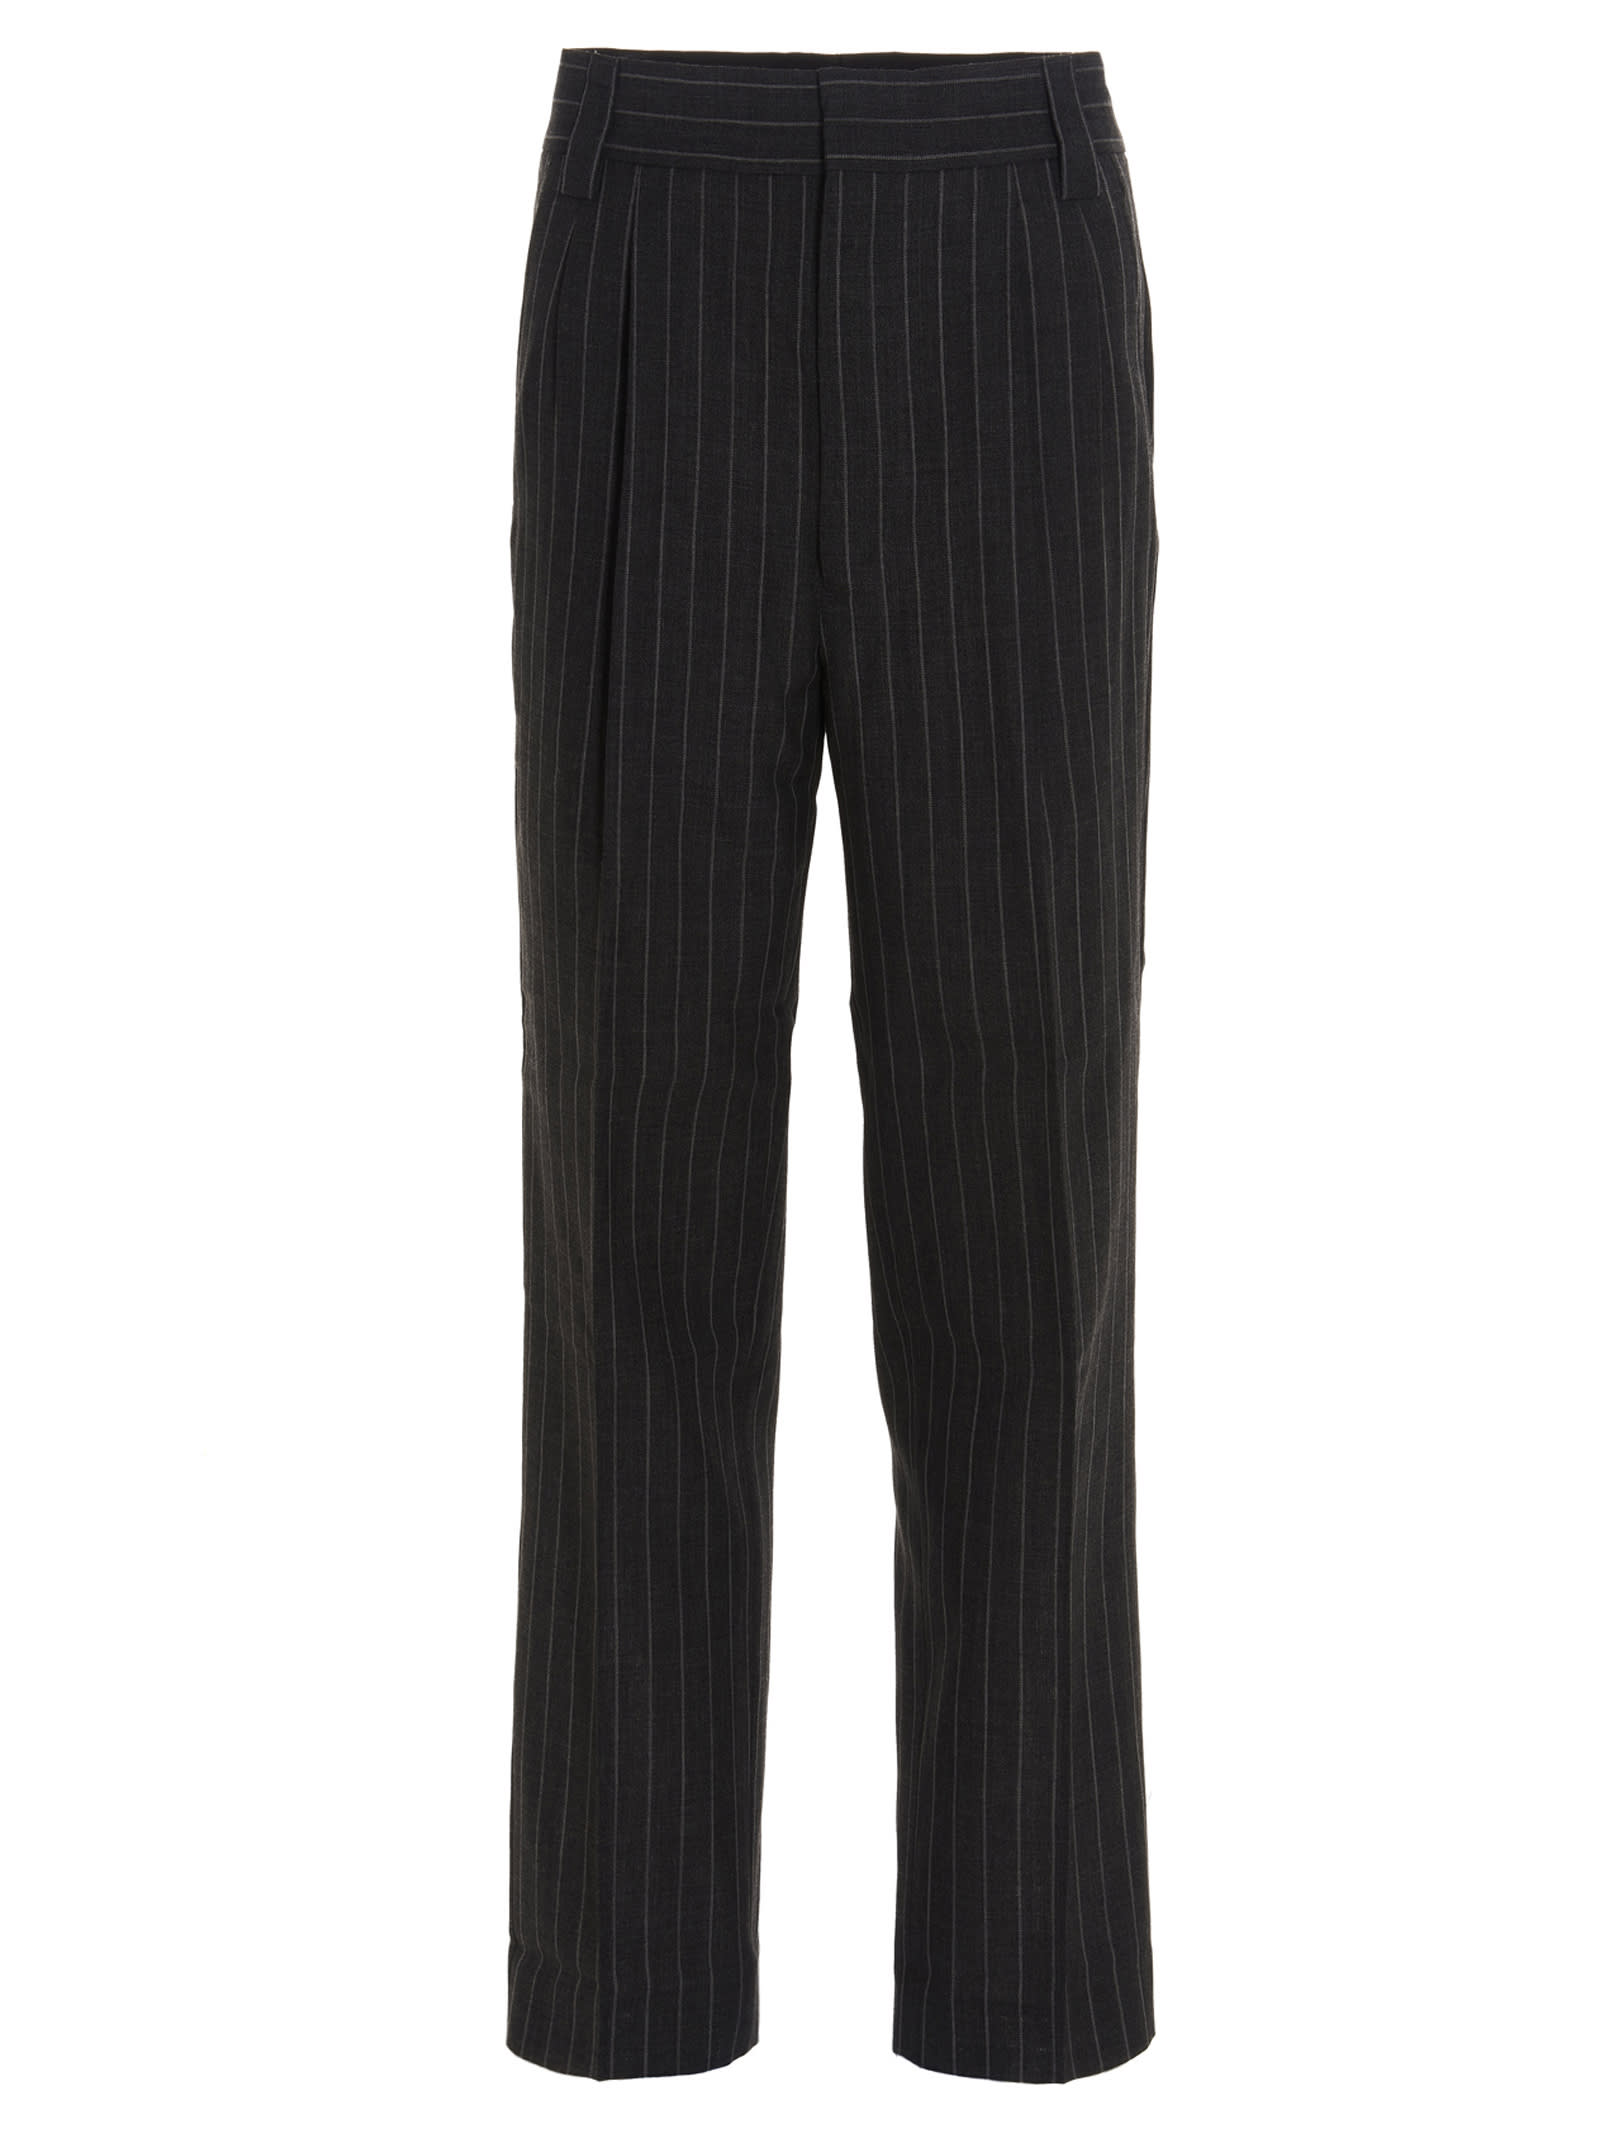 Fear of God Striped Trousers